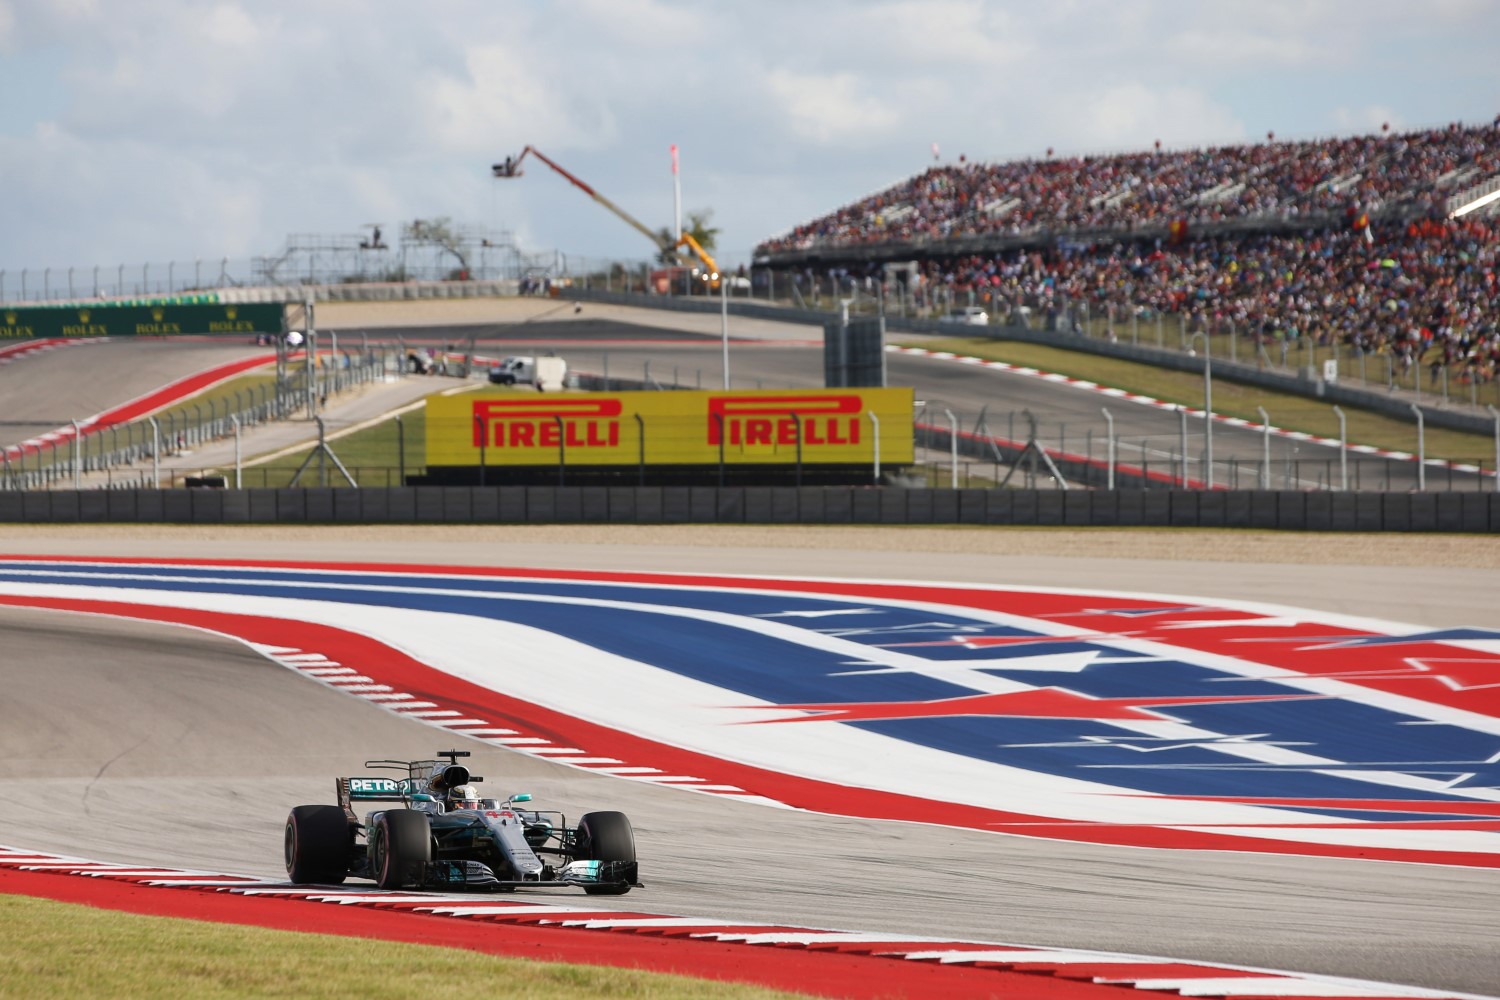 COTA is a first-rate facility